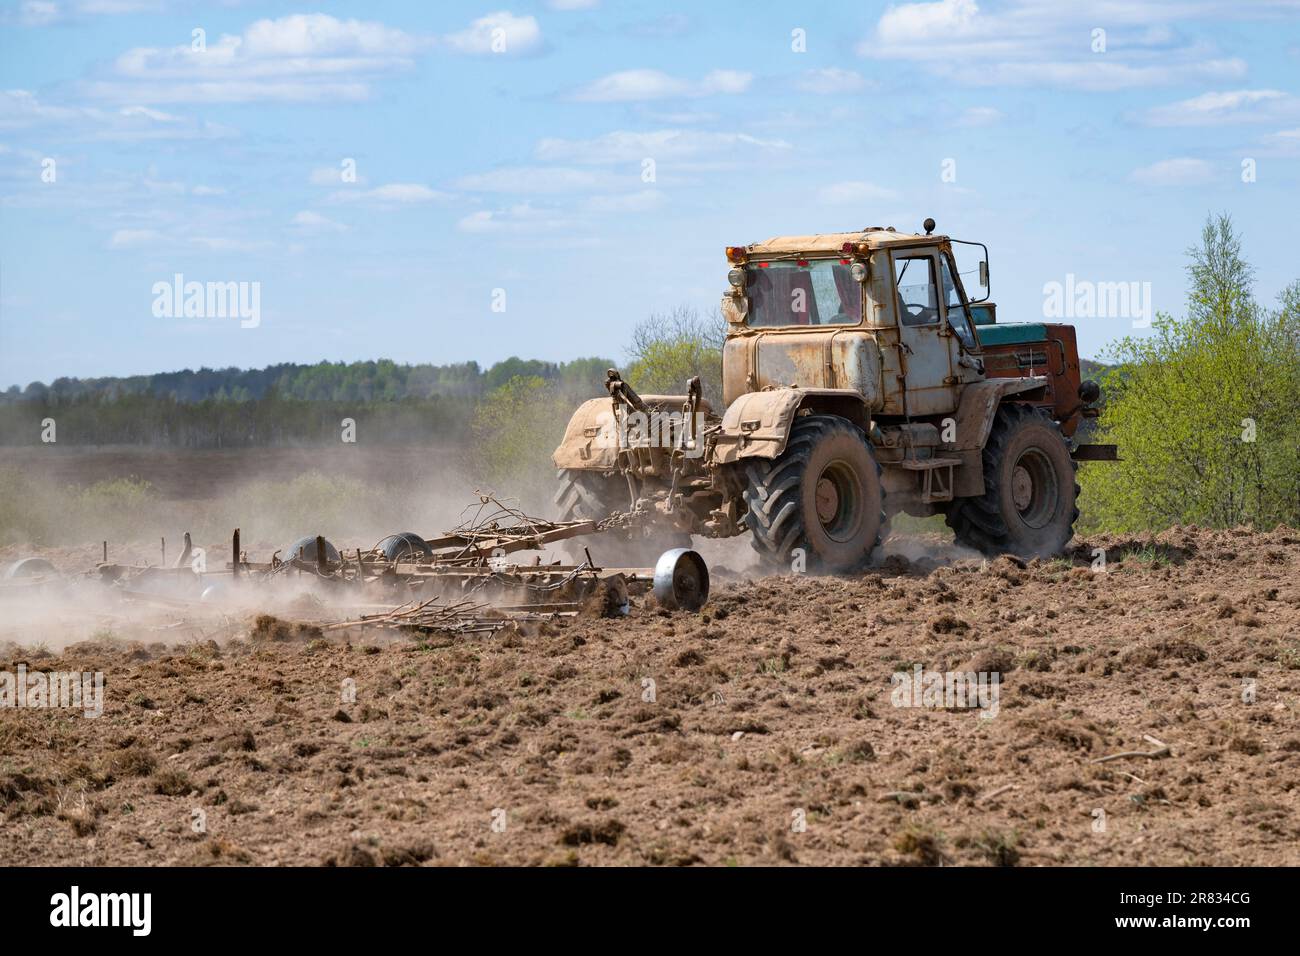 PSKOV REGION, RUSSIA - MAY 07, 2023: Old T-150K (Soviet agricultural wheeled tractor) harrows a plowed field on a sunny May day Stock Photo